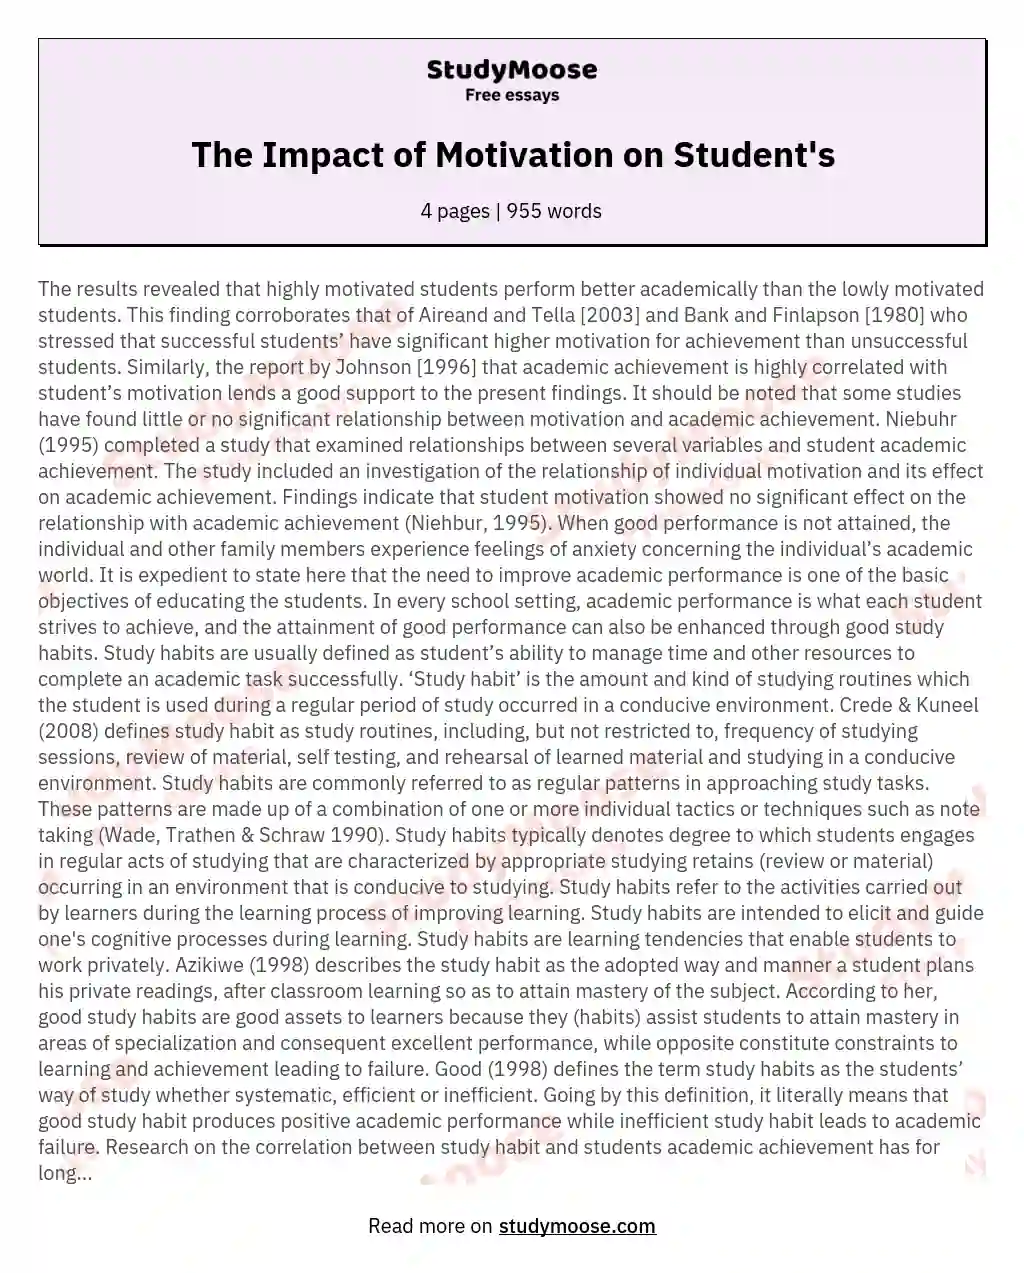 The Impact of Motivation on Student's essay